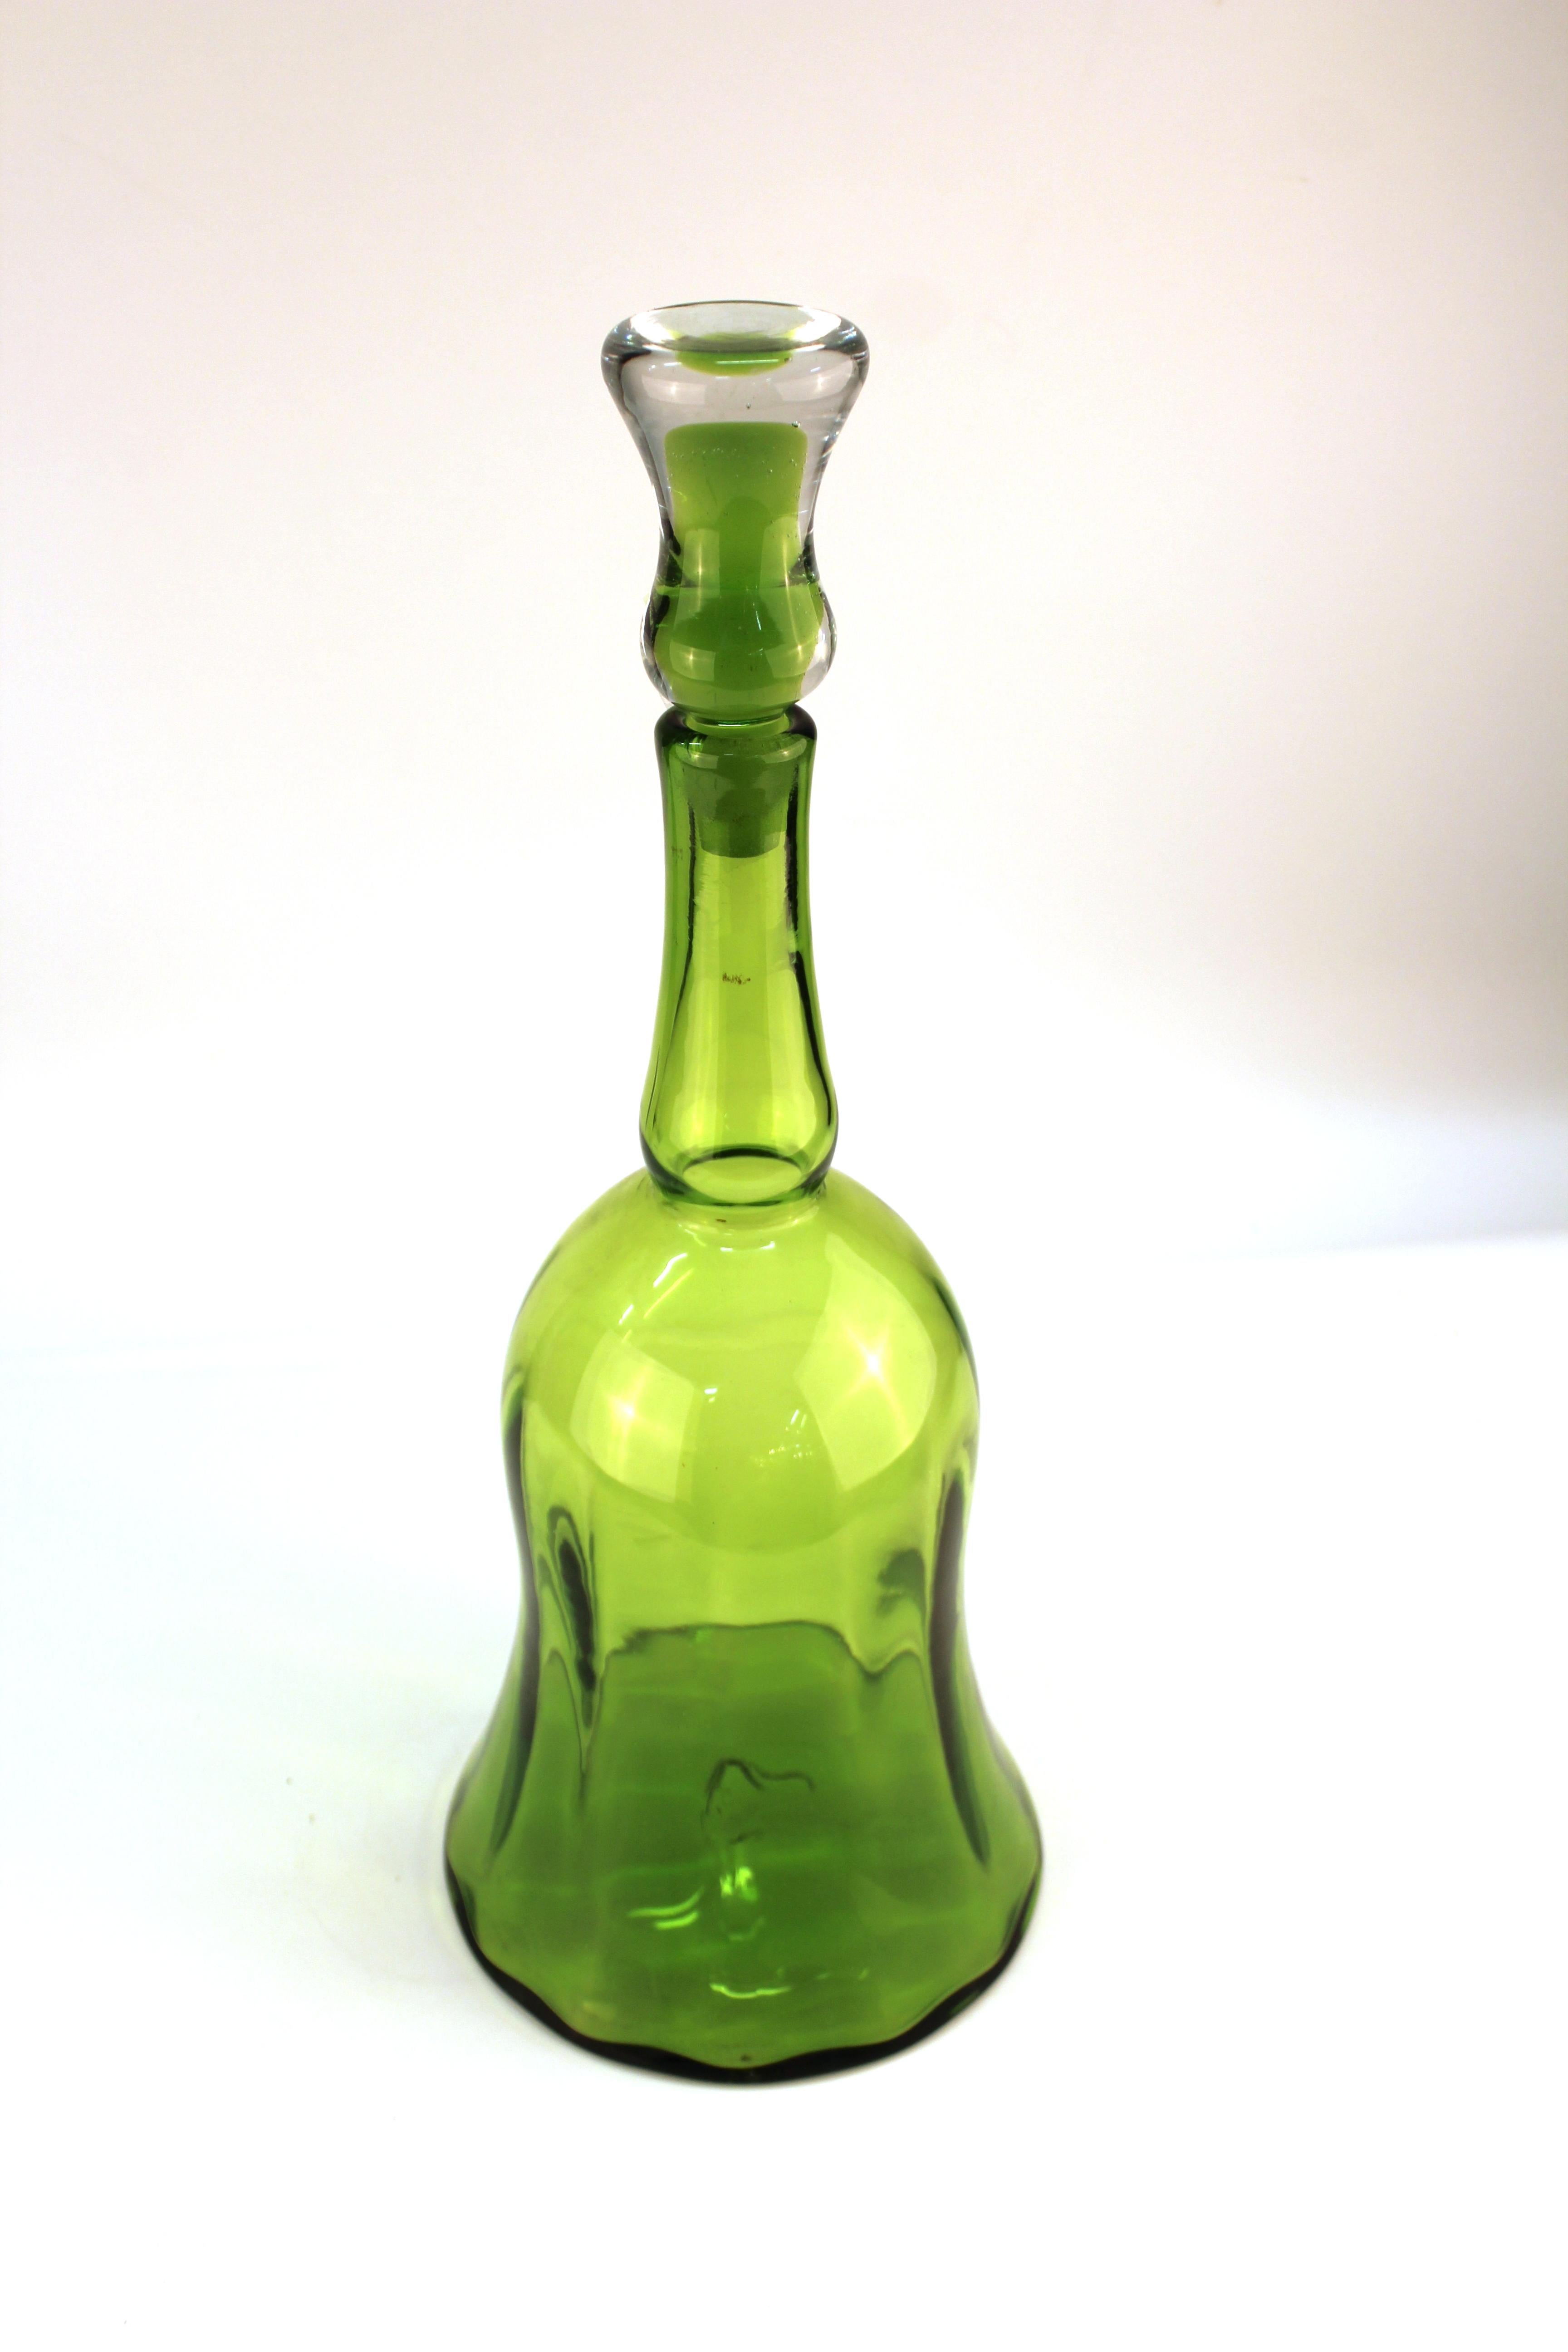 American Mid-Century Modern glass decanter made by Wayne Husted for Blenko Glass in the 1970s. The piece is in rare lime green and features a large glass stopper. In very good vintage condition.